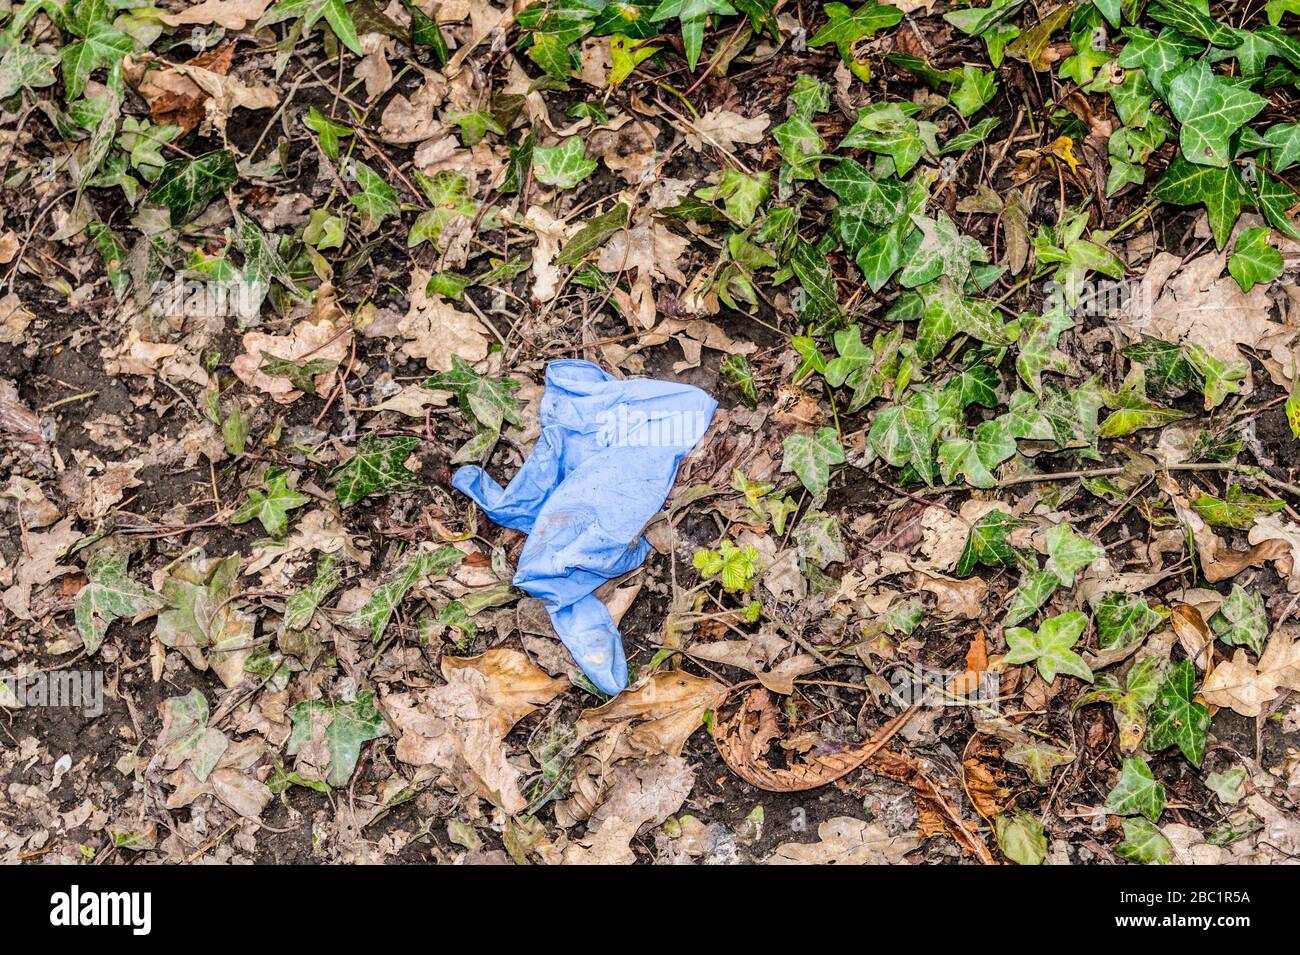 A discarded latex glove in Epping forest, South Woodford, London, England Stock Photo